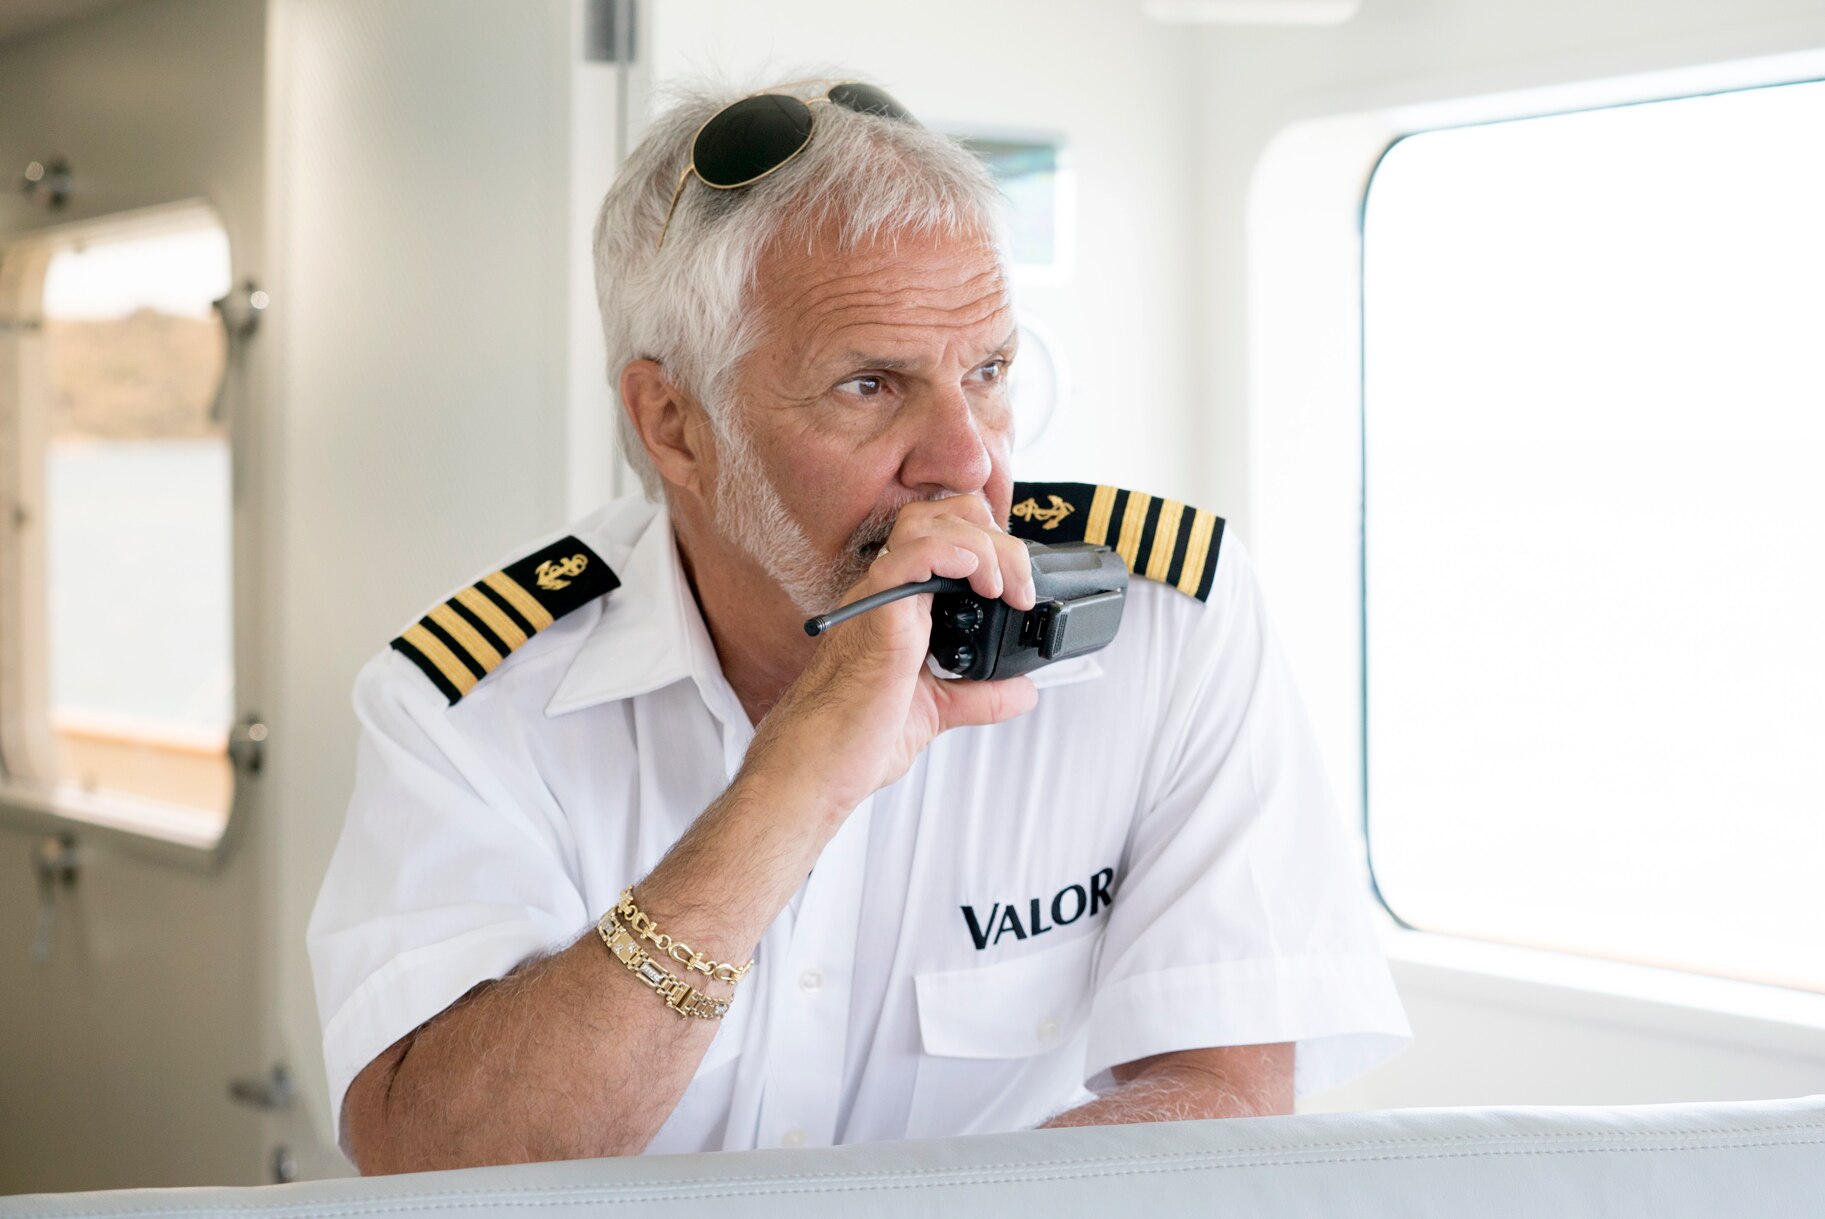 We all know that Below Deck's Captain Lee Rosbach is the "Stu...